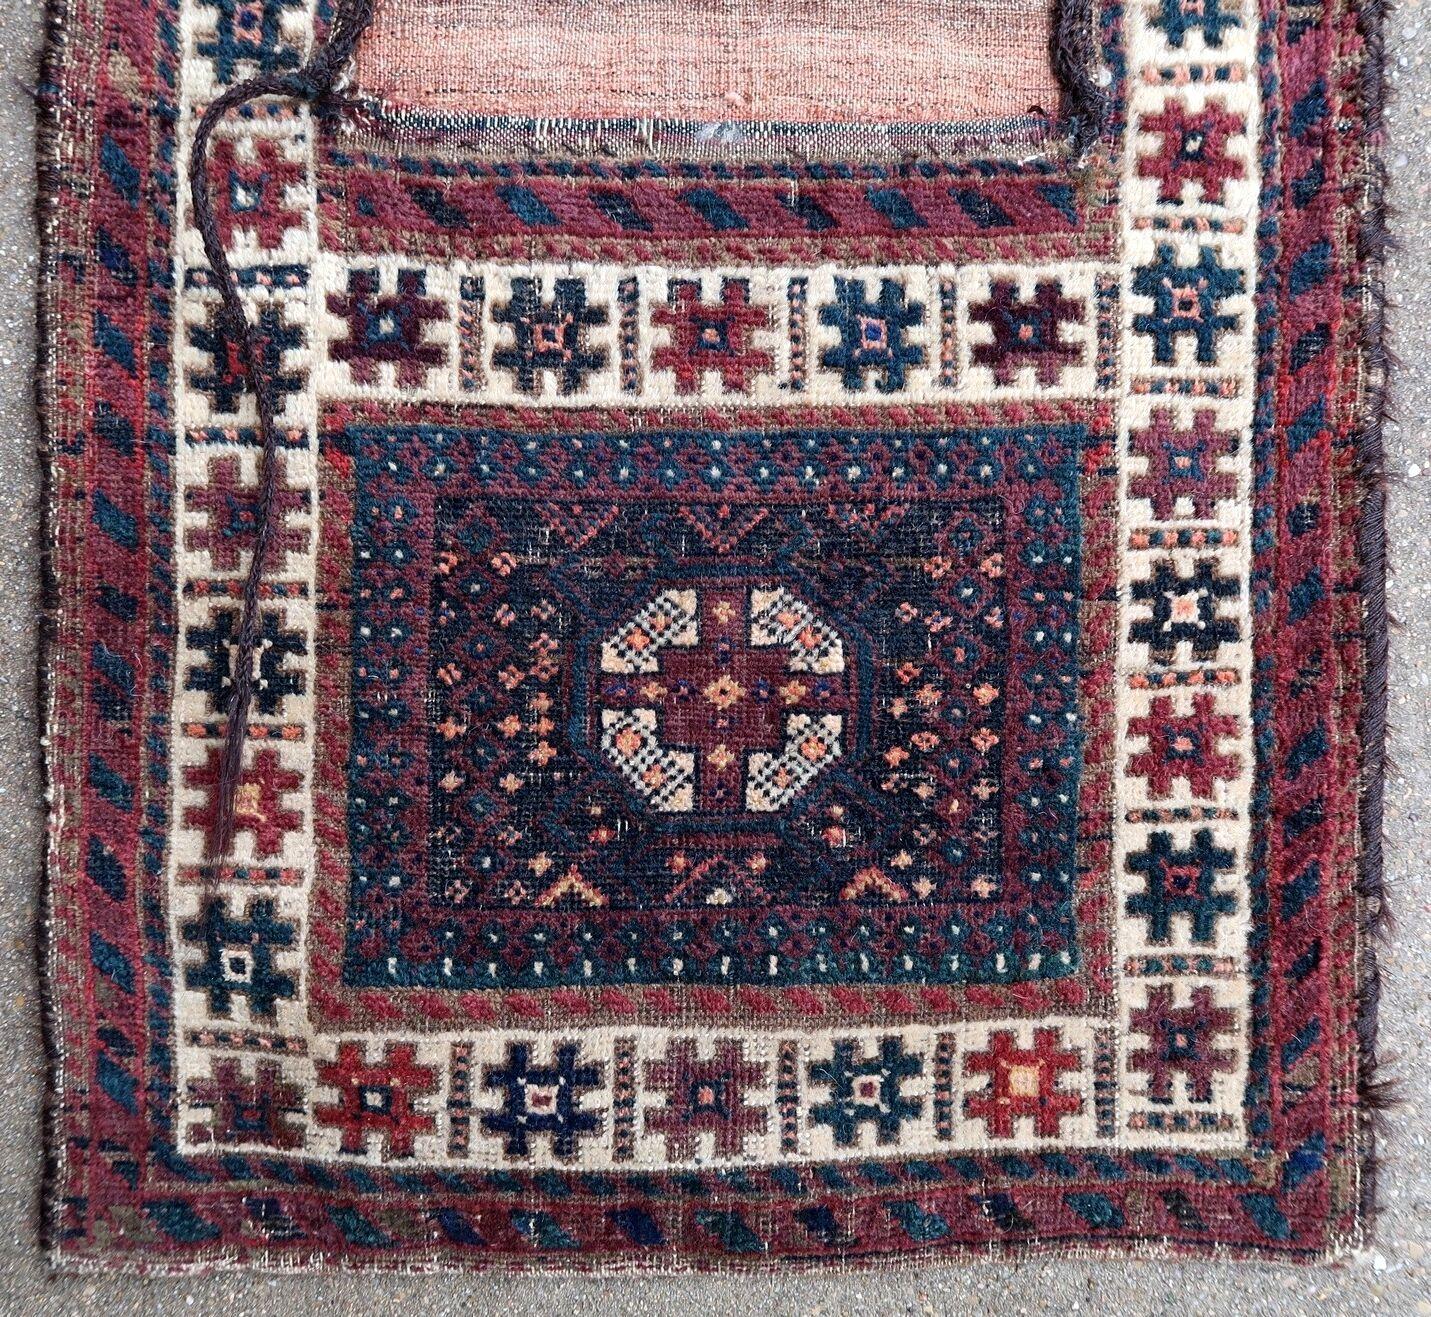 Handmade antique Baluch bag from Afghanistan in original condition, it has age wear. The rug is from the beginning of 20th century.

?-condition: original, age wear,

-circa: 1900s,

-size: 1.5' x 3.2' (47cm x 98cm),

-material: